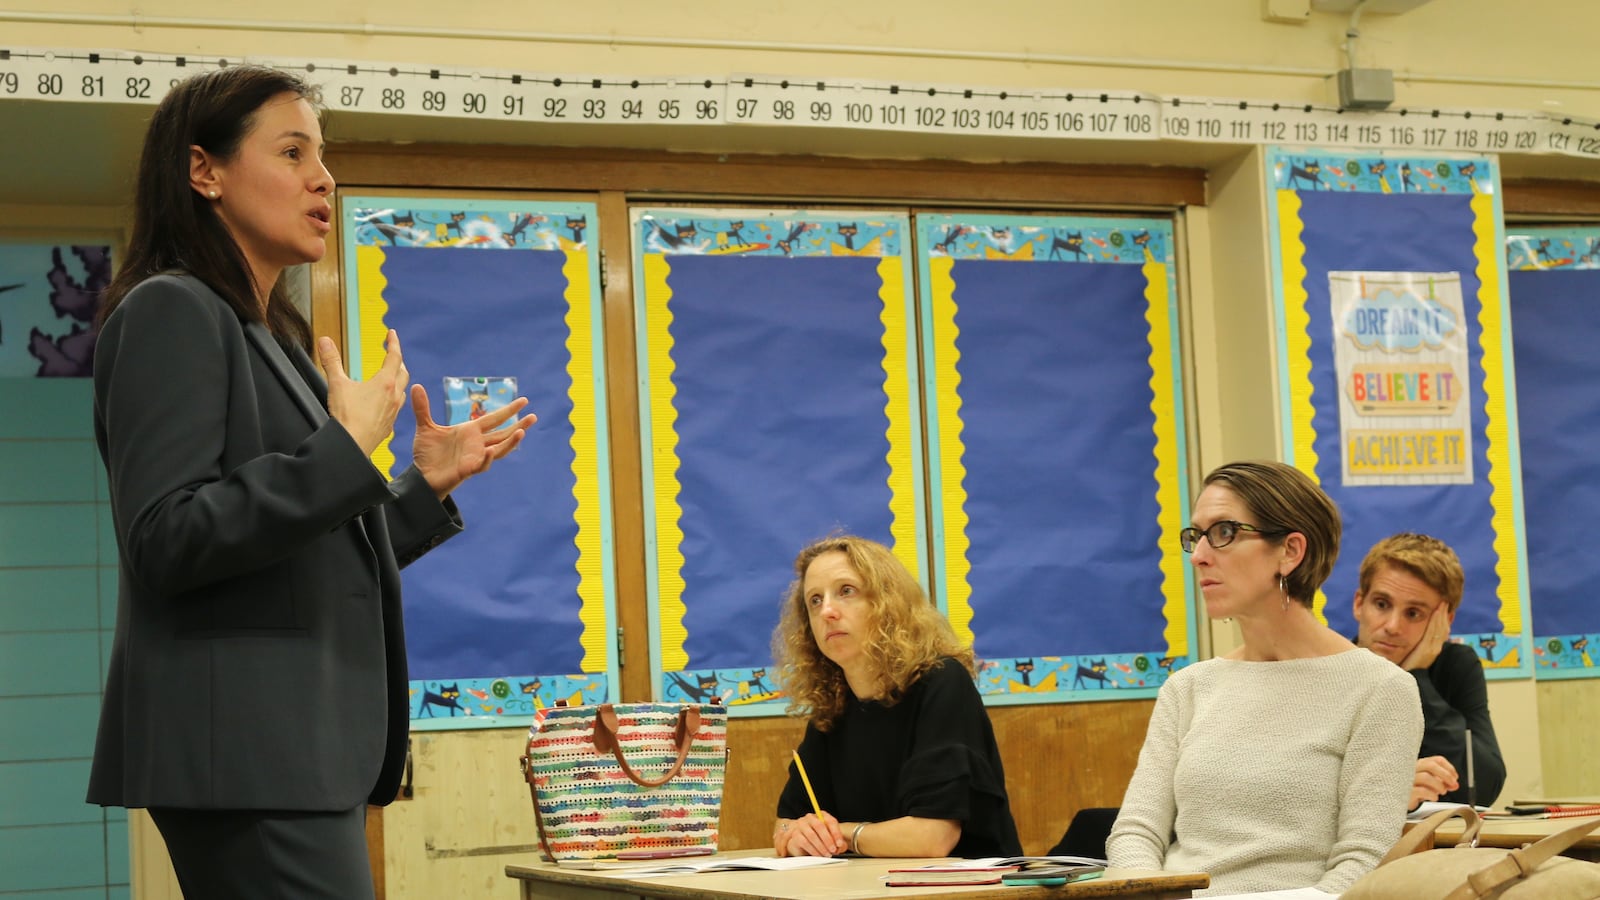 Claudia Aguirre, principal of P.S. 149 Sojourner Truth in Harlem, highlighted her school at a recent forum for District 3 parents to learn about their middle school options.